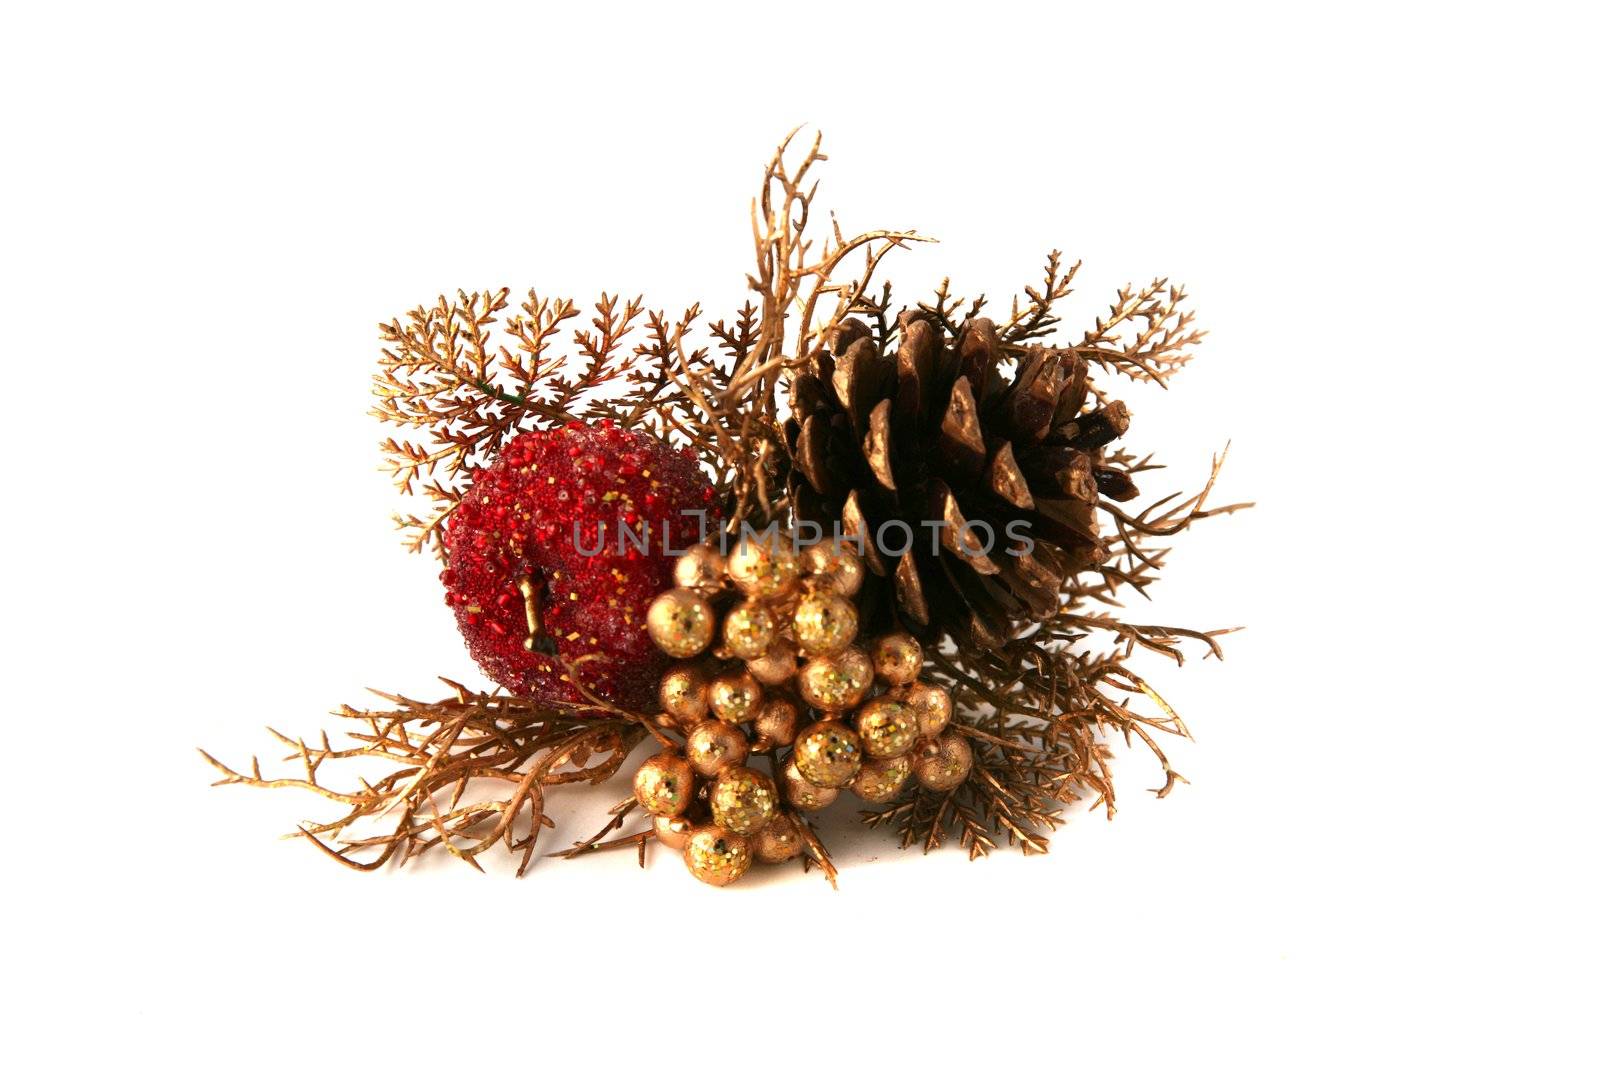 Apple and berry Christmas decoration with pine cone